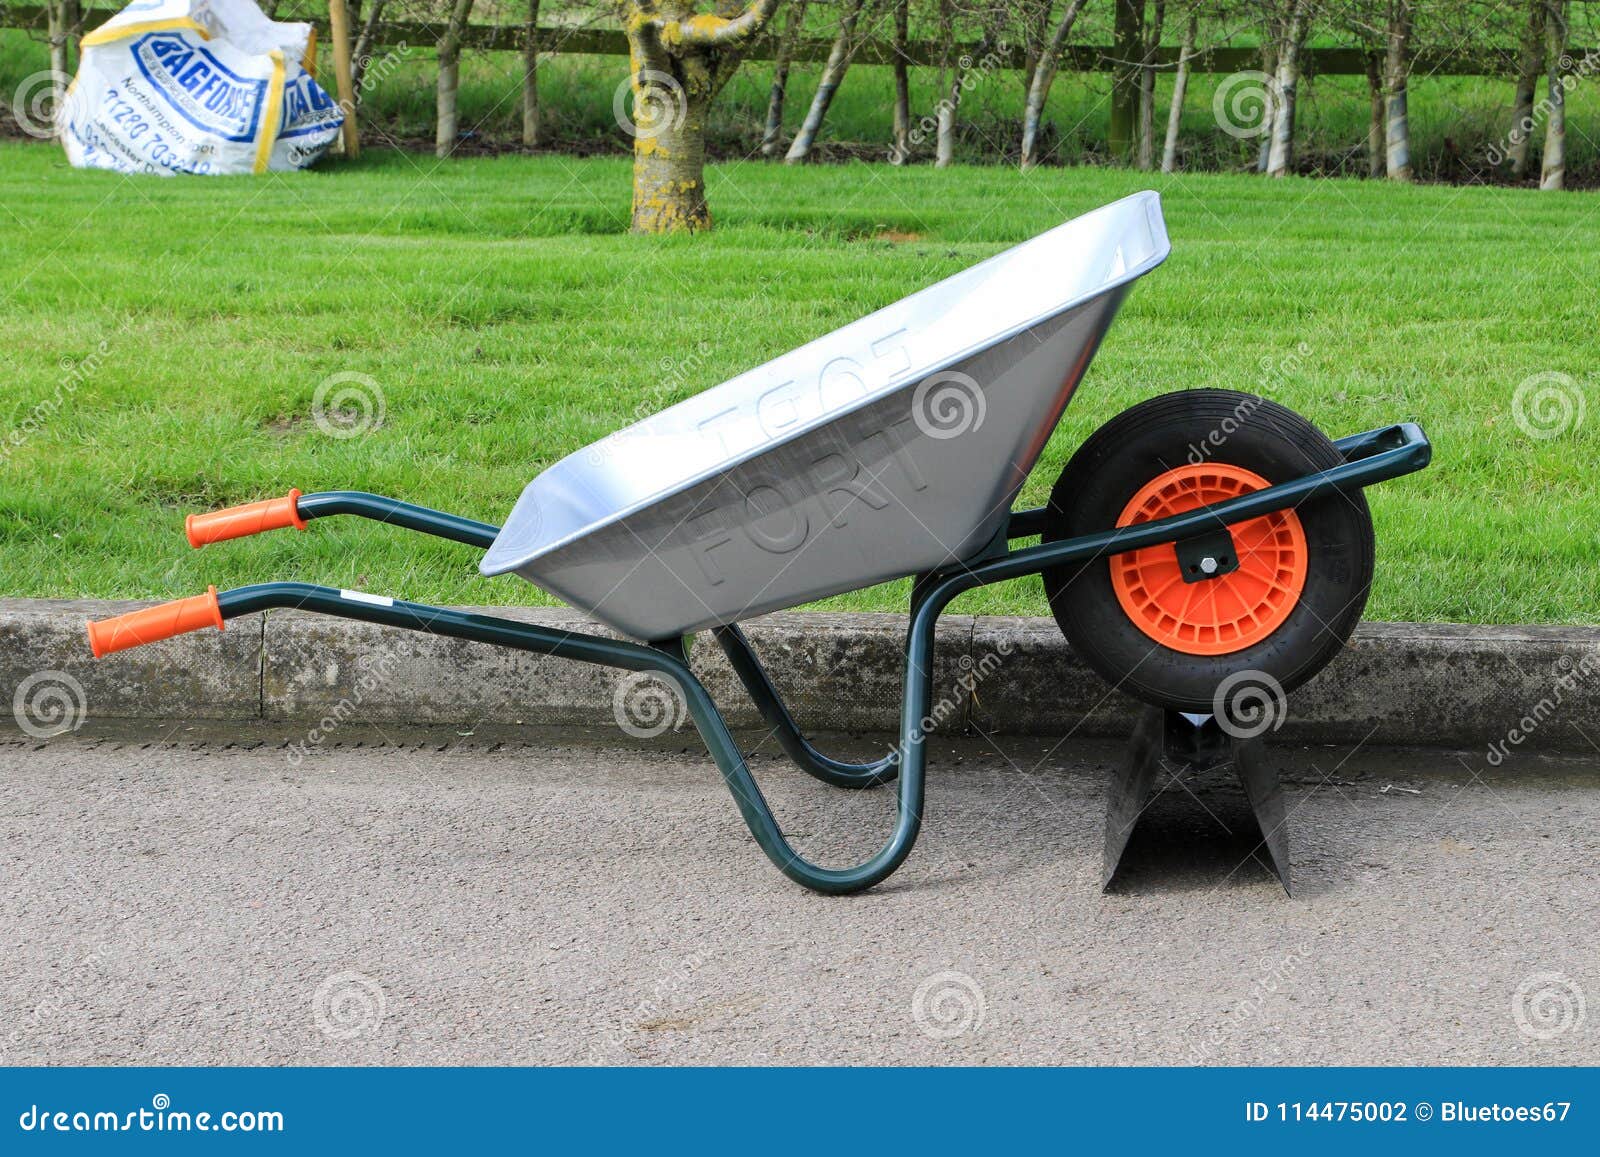 IV. Essential Tools and Accessories for Wheelbarrow Maintenance